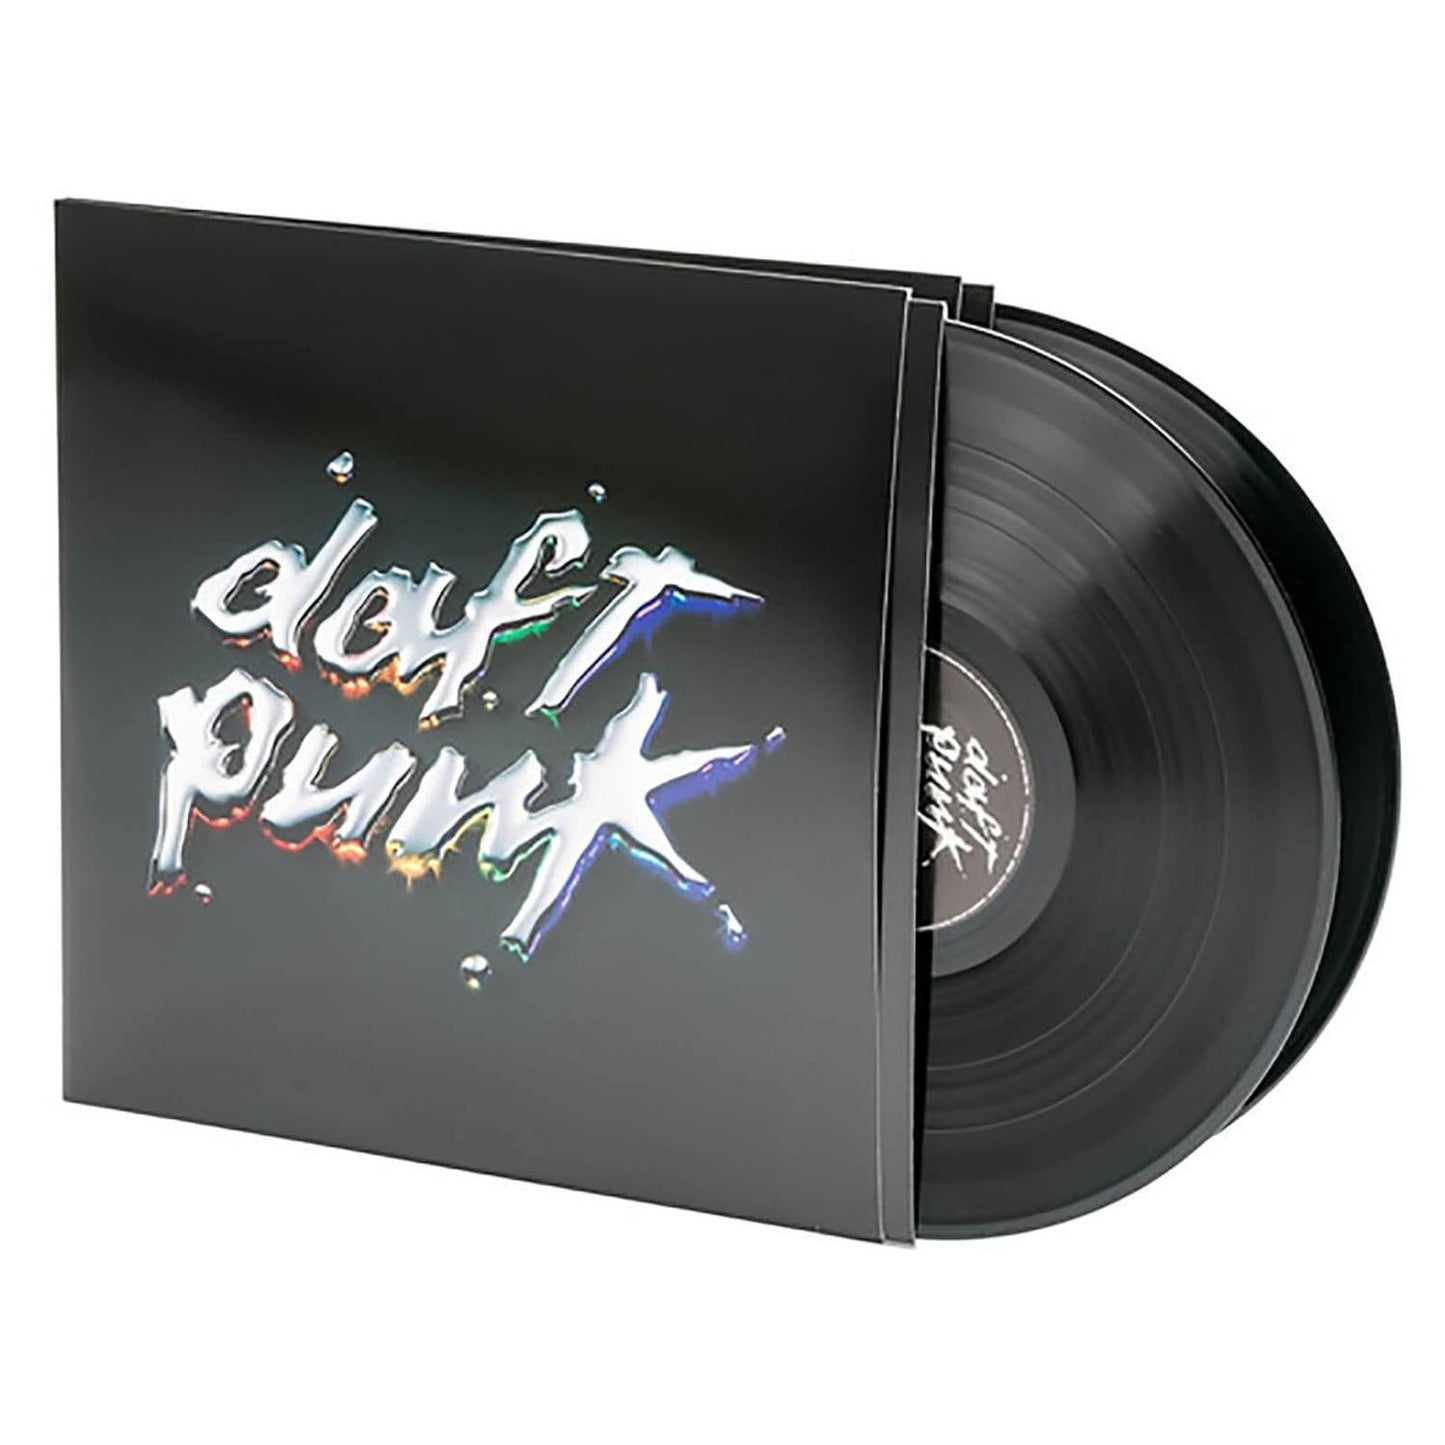 NEW - Daft Punk, Discovery 2LP